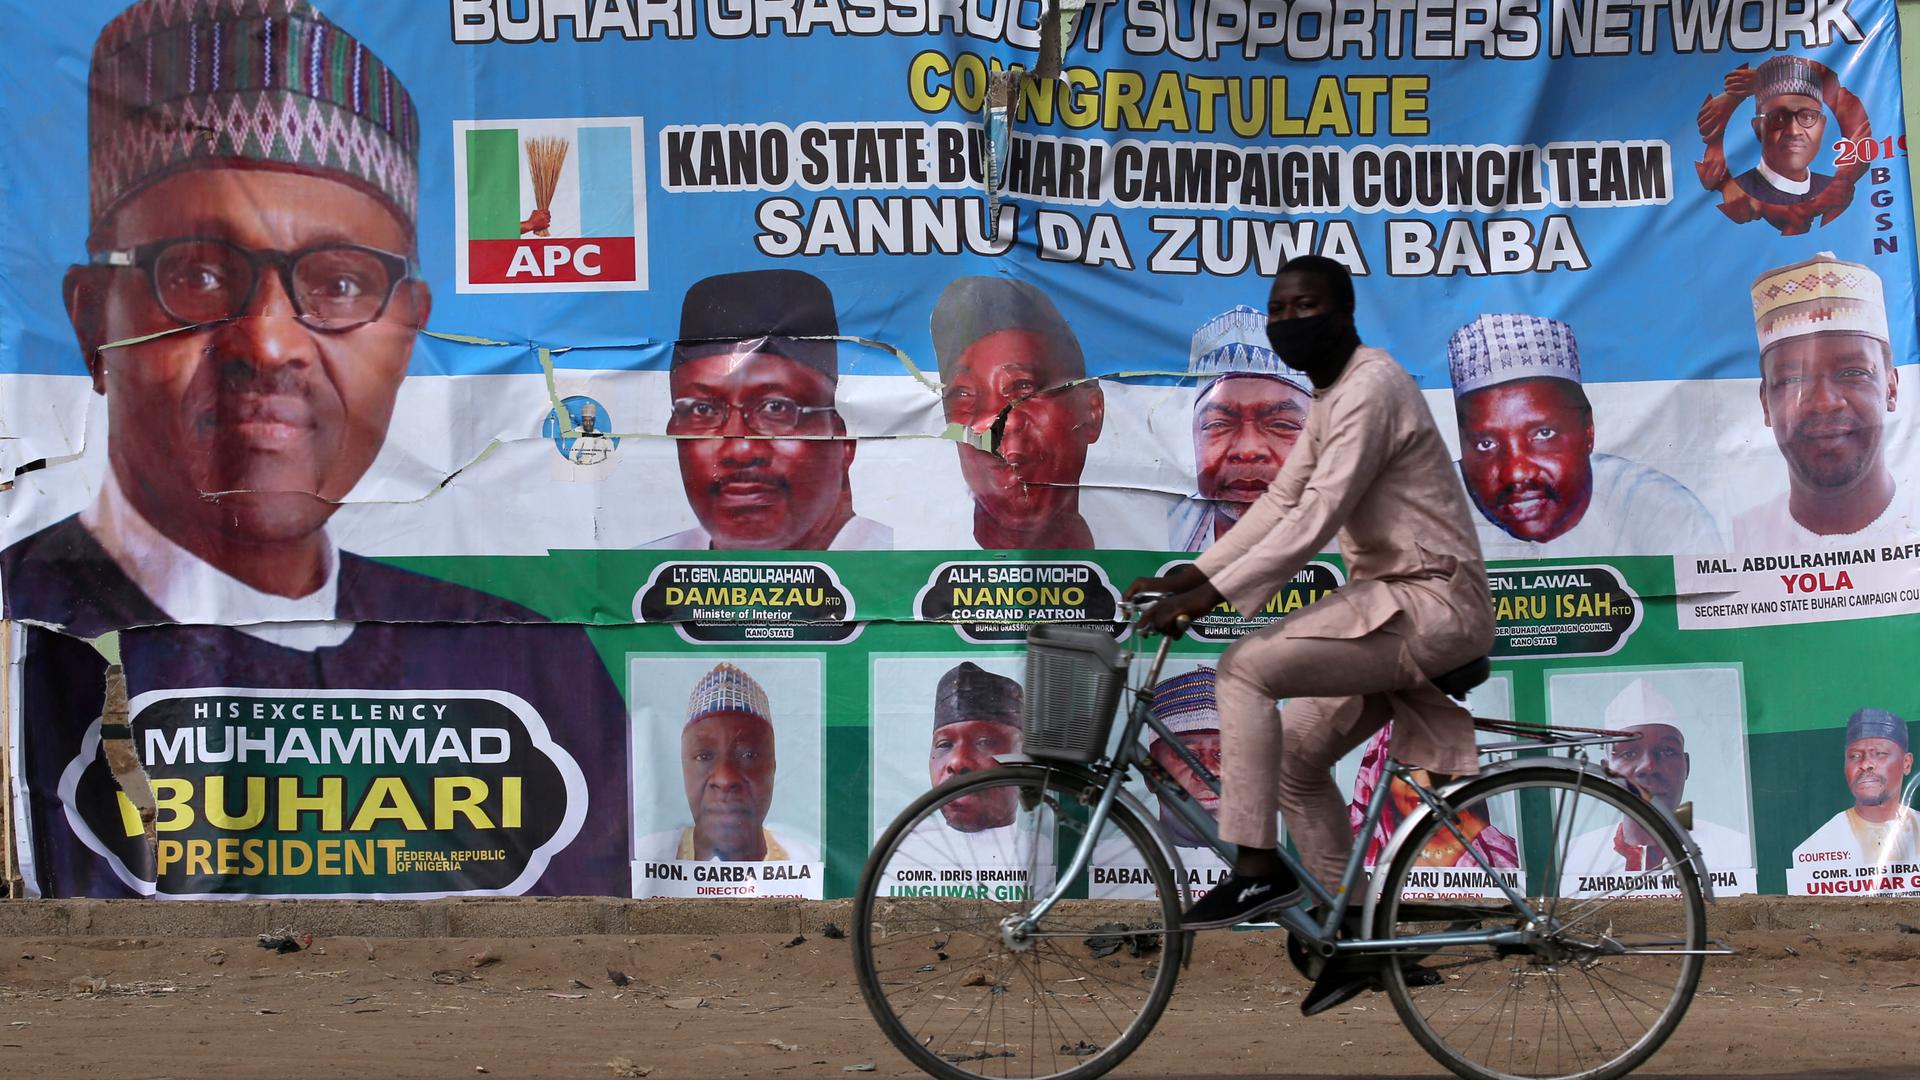 A cyclist drives pasts a campaign poster for President Muhammadu Buhari in a street